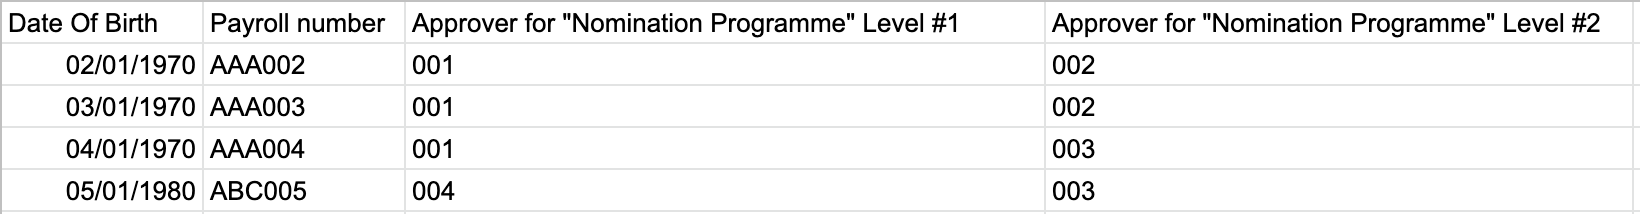 1_programme_2_levels.png